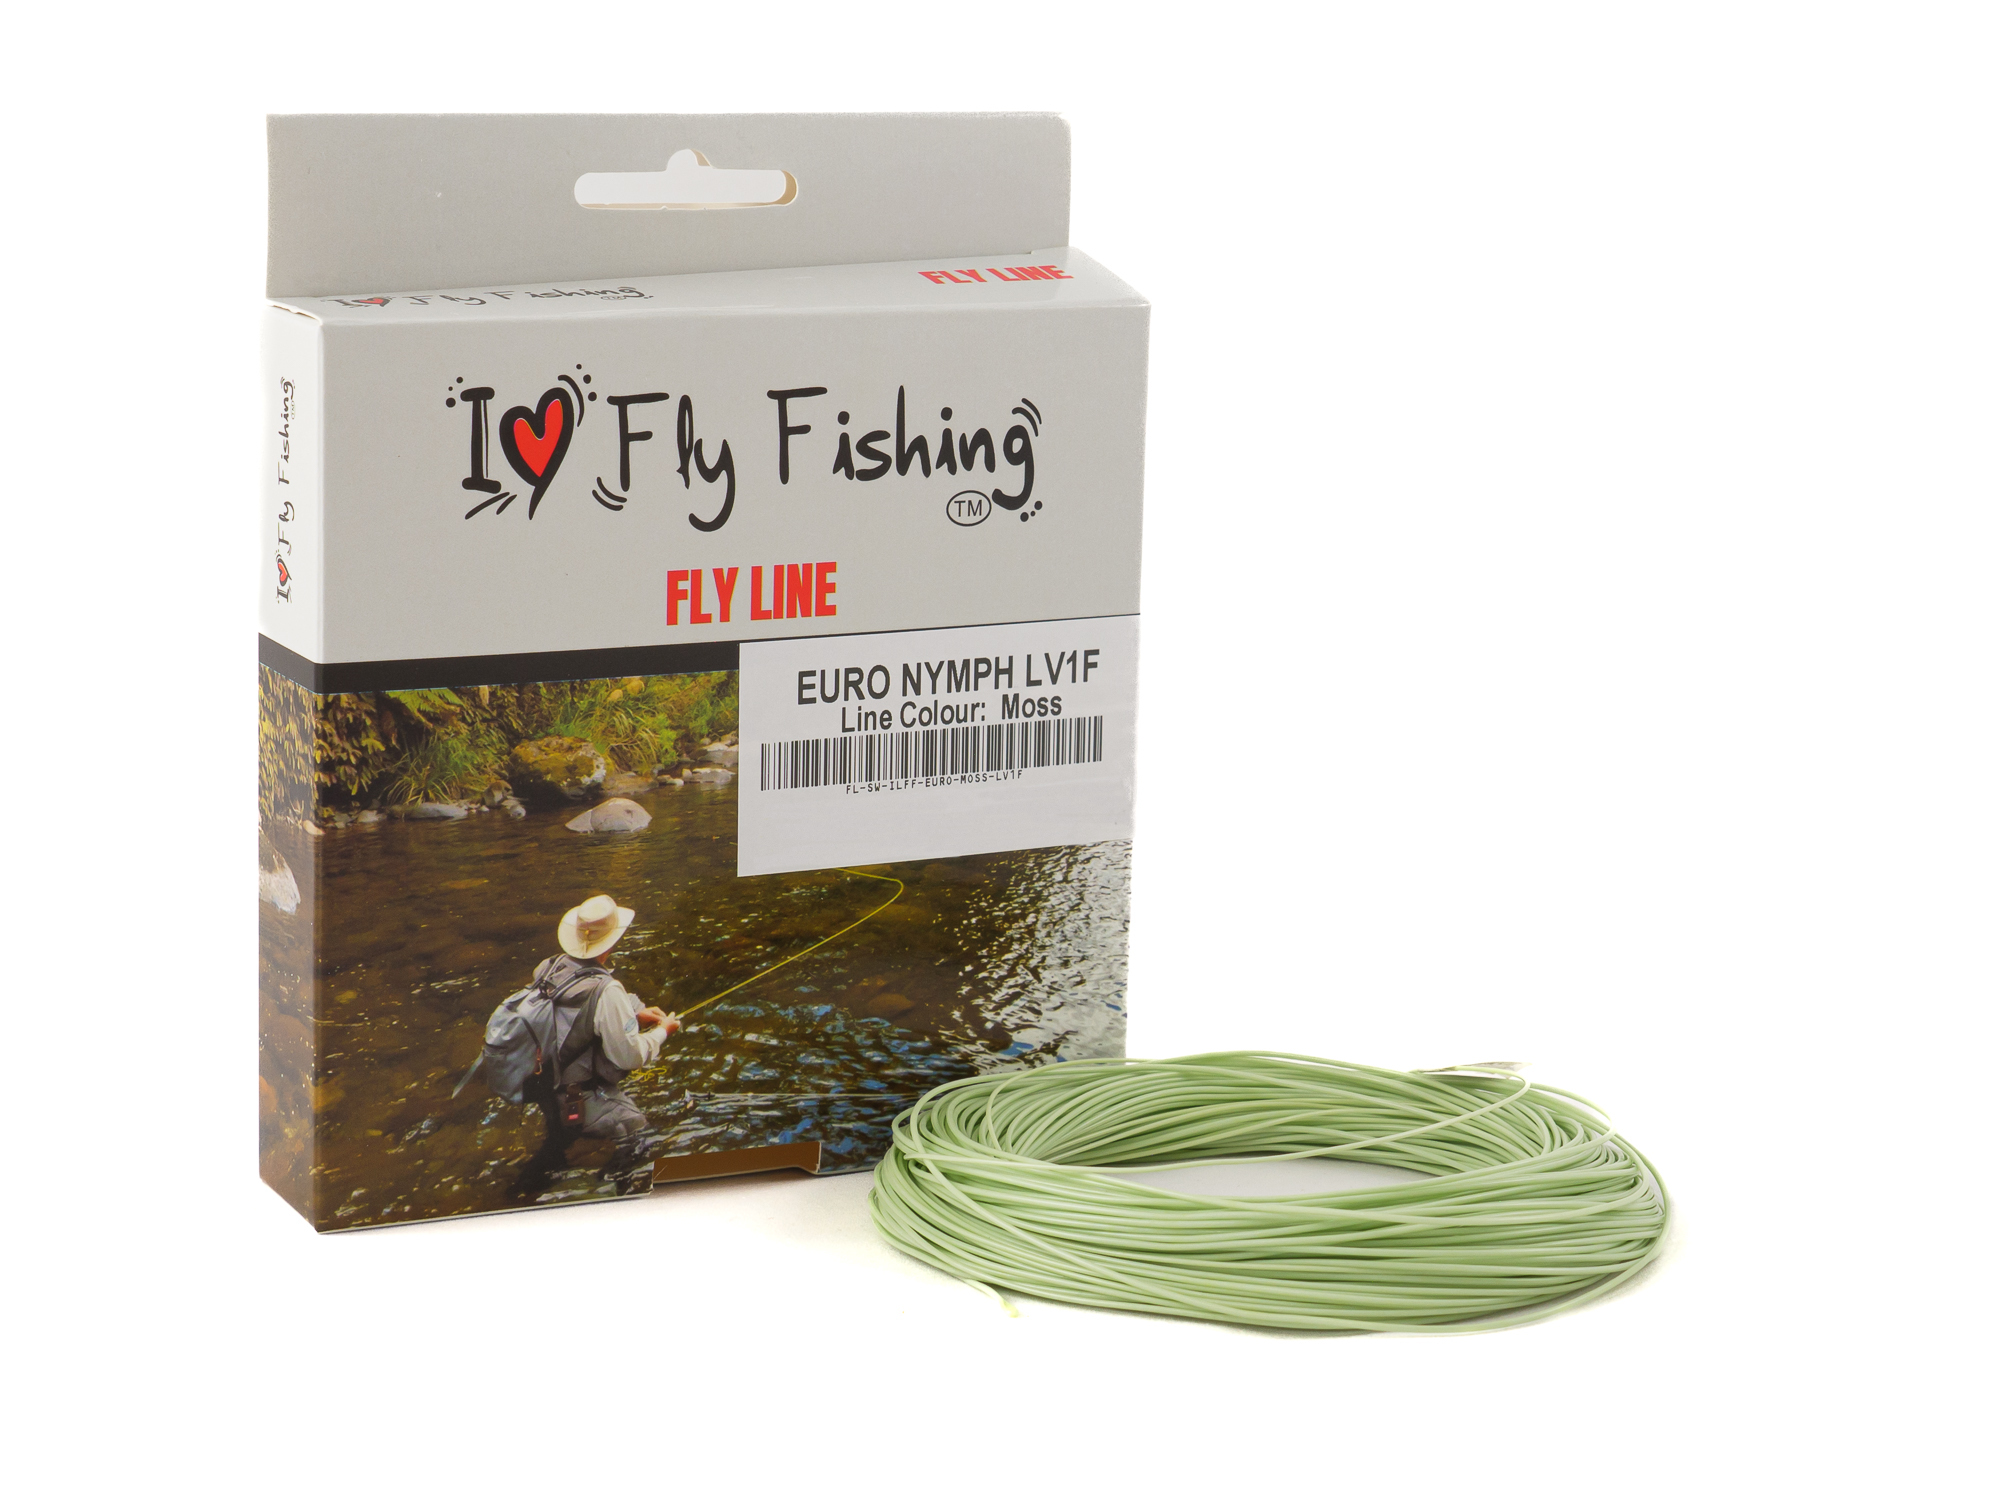 EURO NYMPH Fly Line Floating 0.60mm